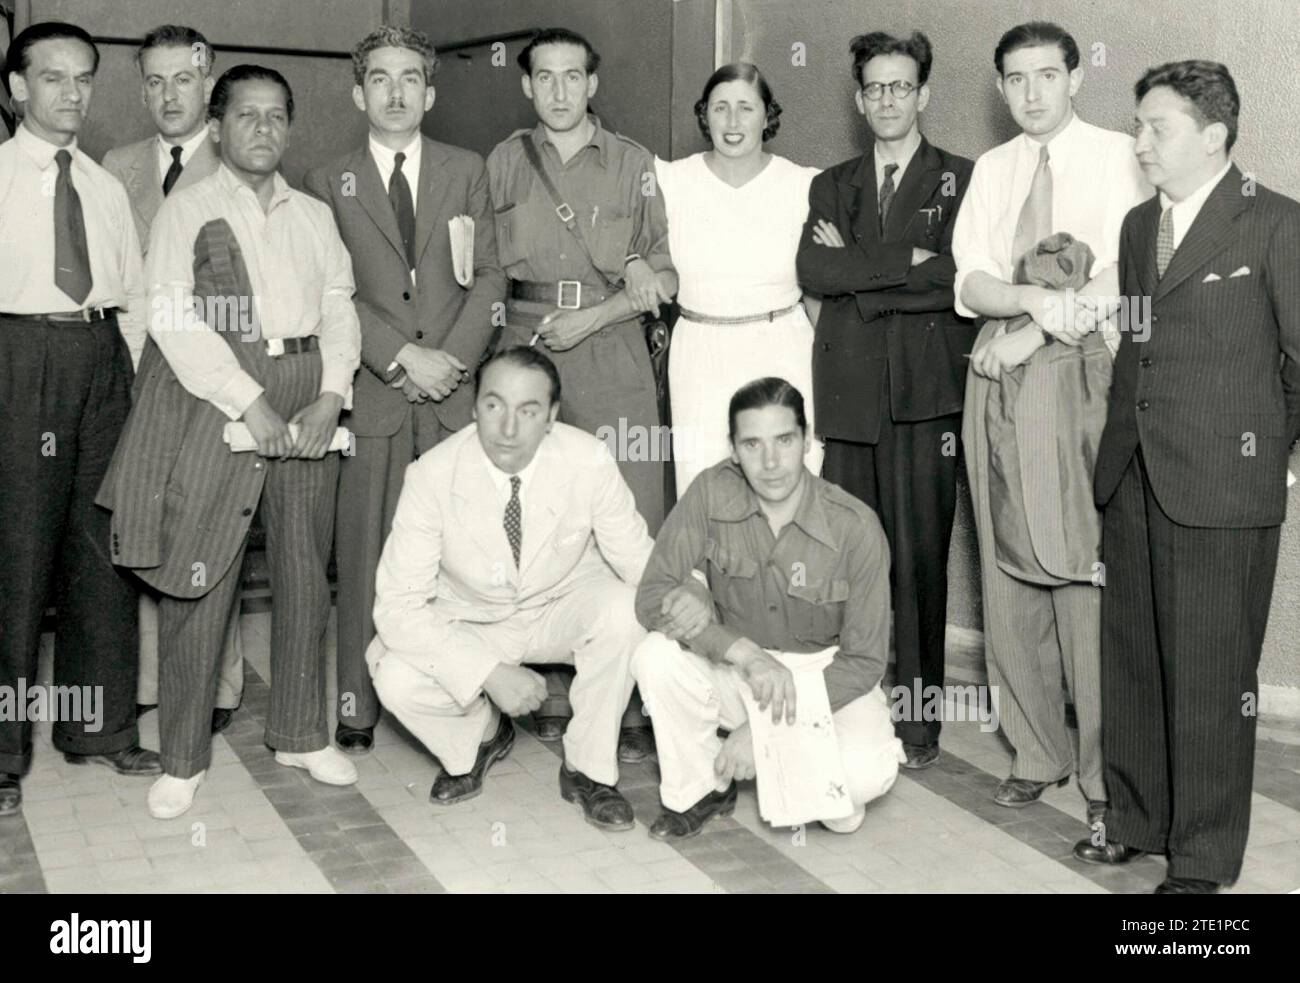 Valencia, July 1937. Attendees at the Congress of Anti-Fascist Writers of Valencia, among whom are Pablo Neruda (crouching, on the left of the image), César Vallejo and Nicolás Guillén (first and third from the left). Credit: Album / Archivo ABC Stock Photo